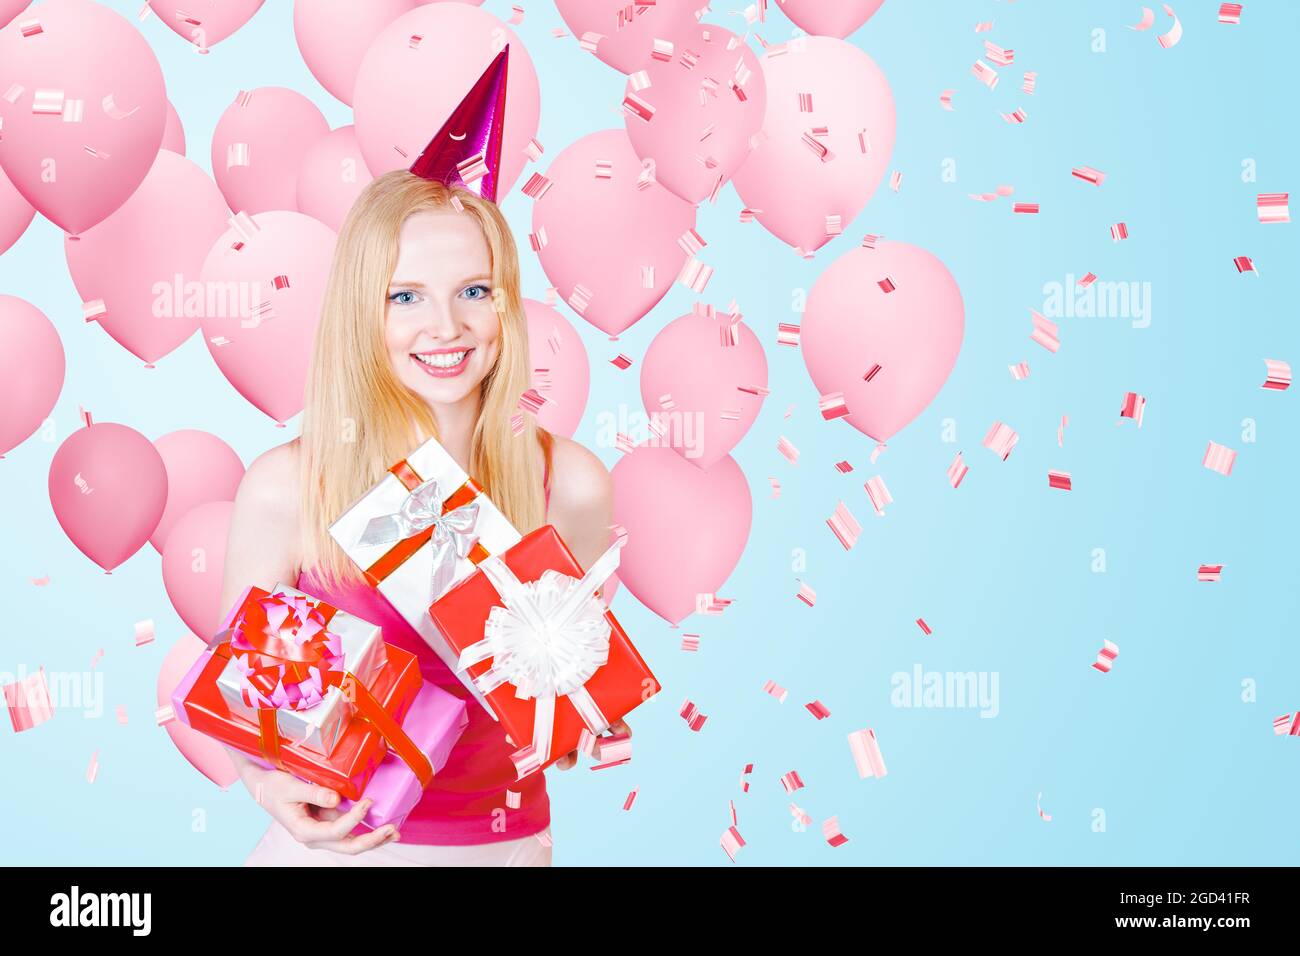 Beautiful Happy Young woman on birthday holiday party with pink air balloons. Stock Photo